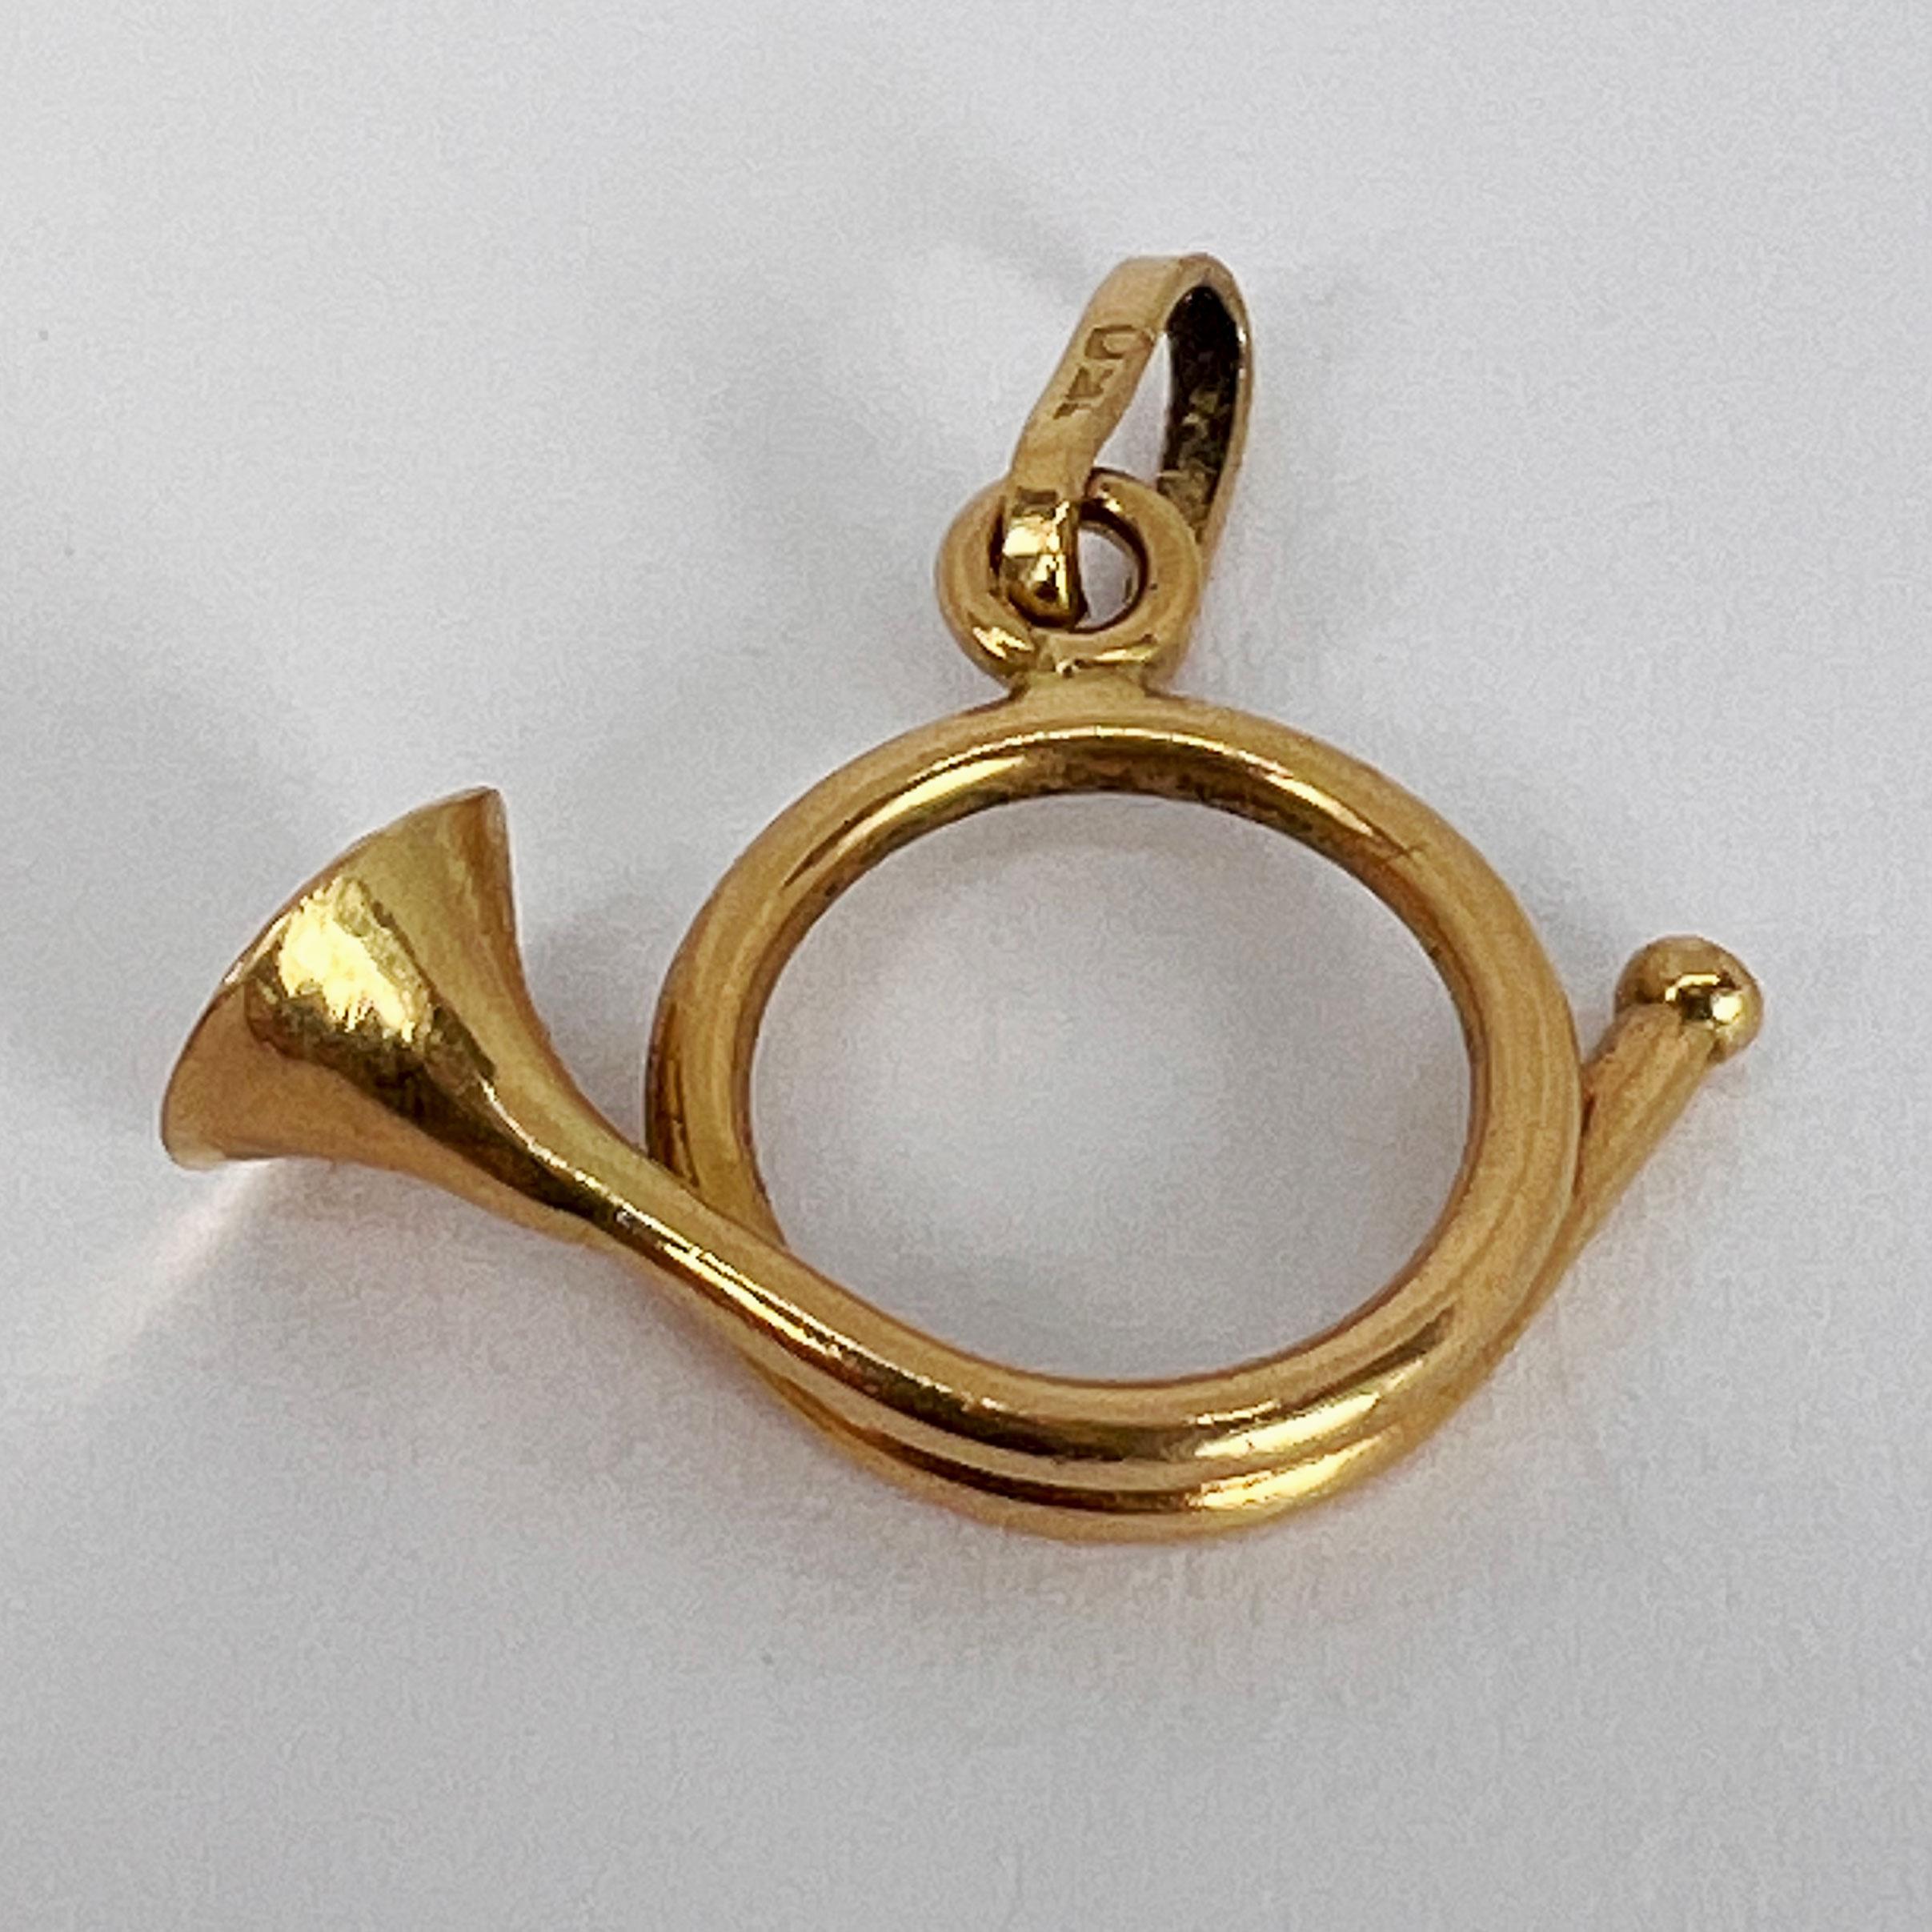 French Horn 18K Yellow Gold Charm Pendant For Sale 2